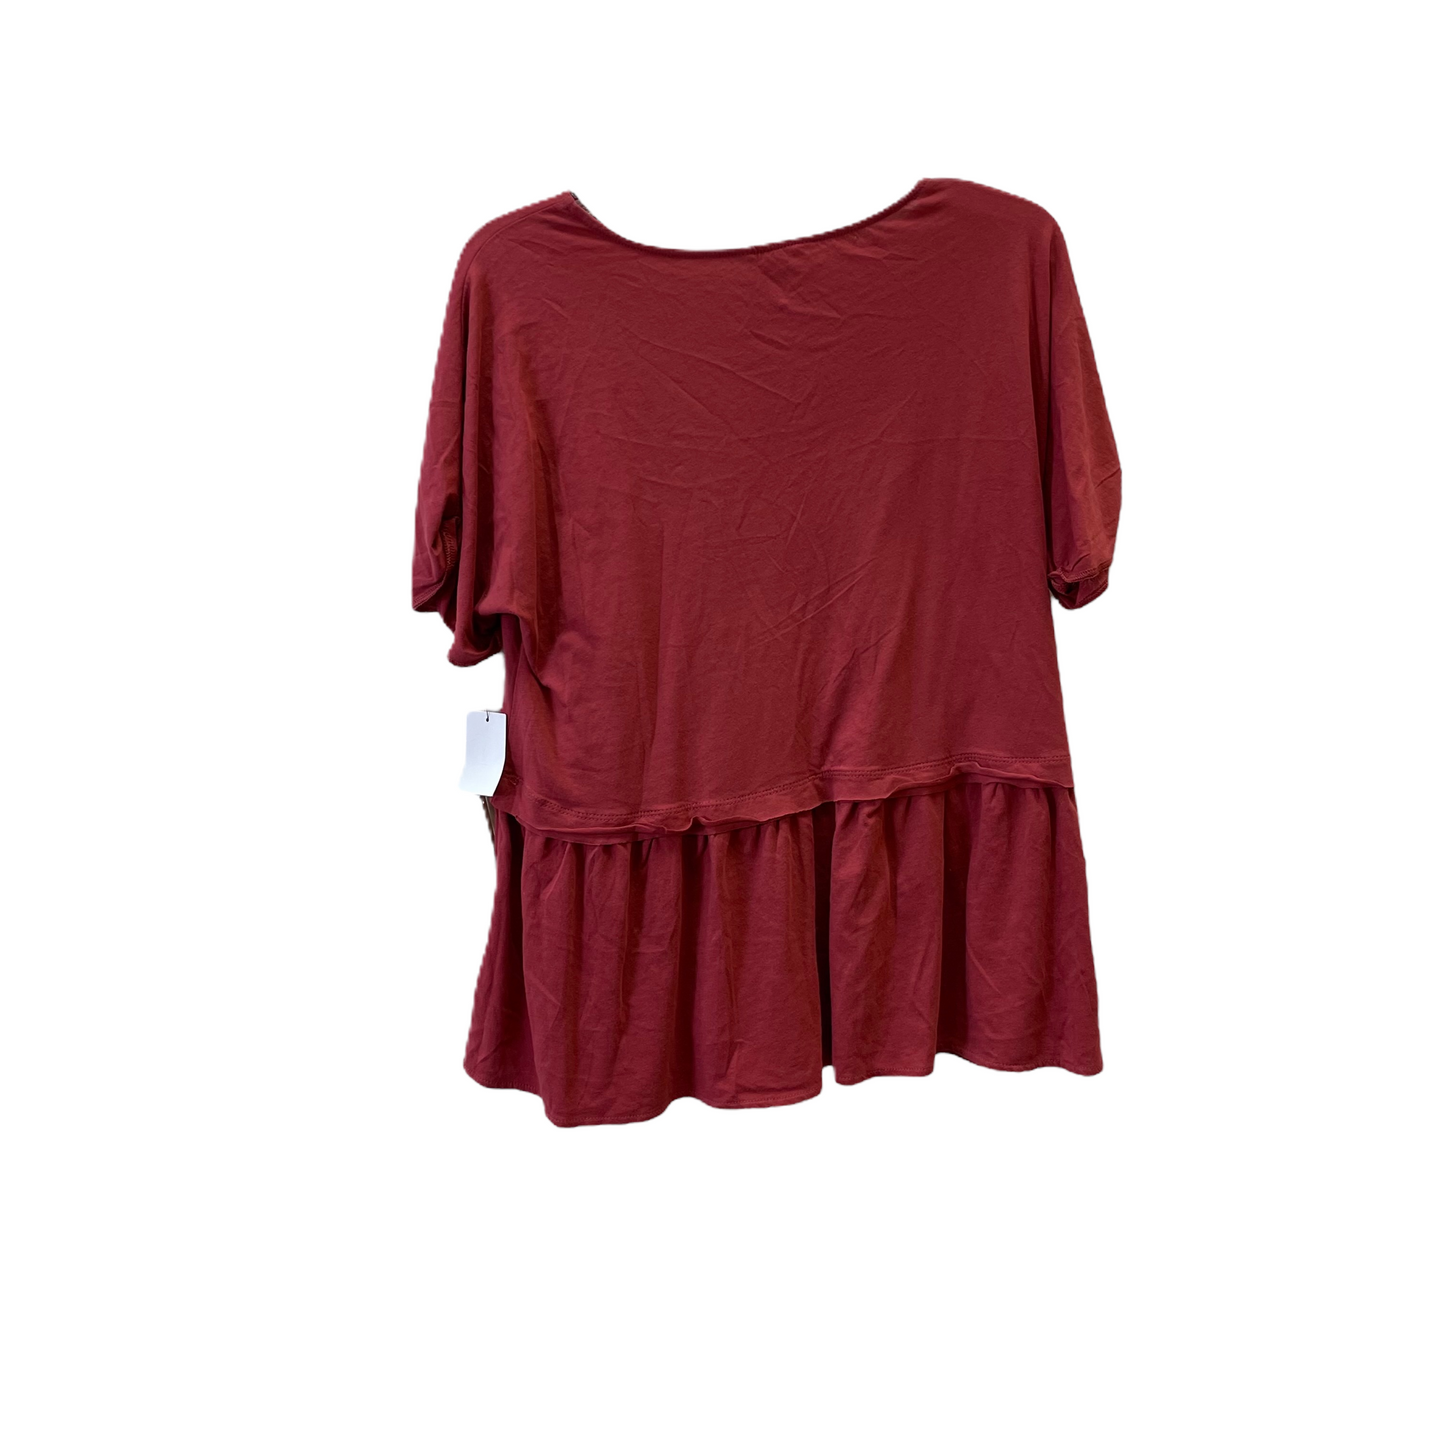 Red Top Short Sleeve Basic By Caslon, Size: Xxs